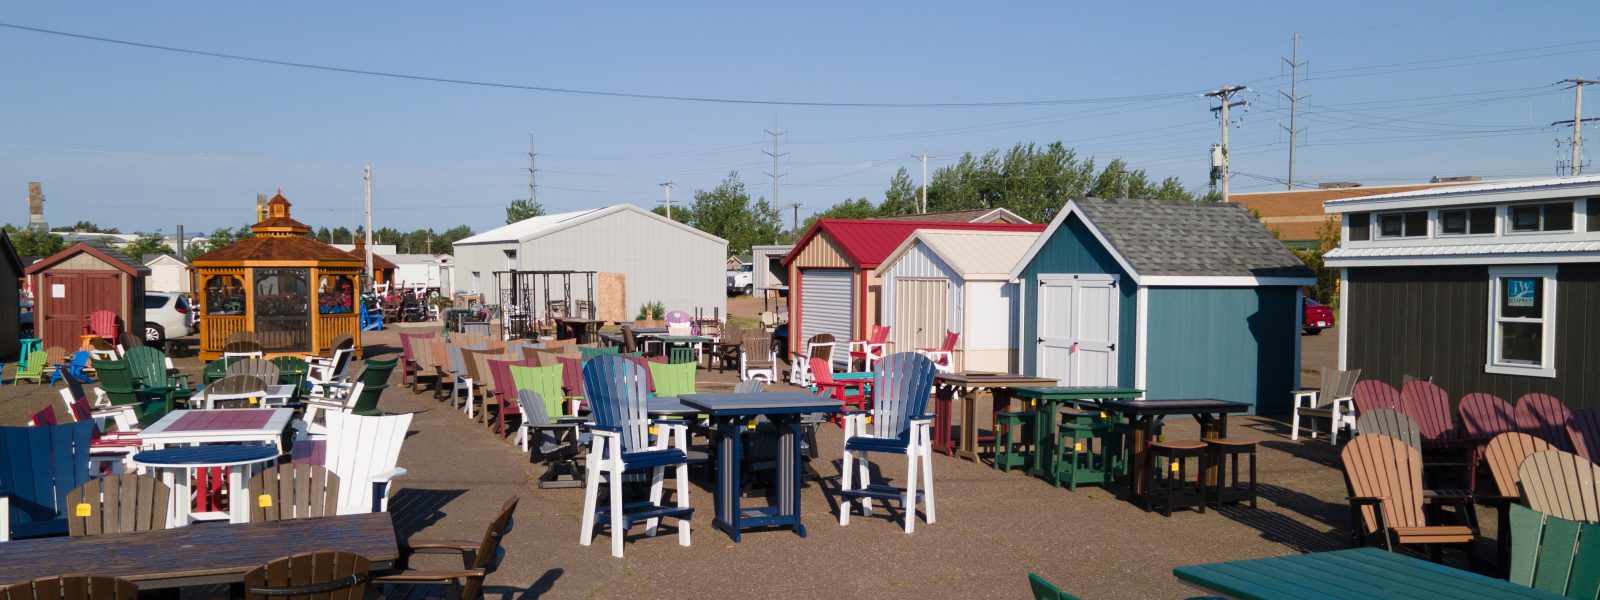 northwood outdoor service area for outdoor products in wisconsin and minnesota